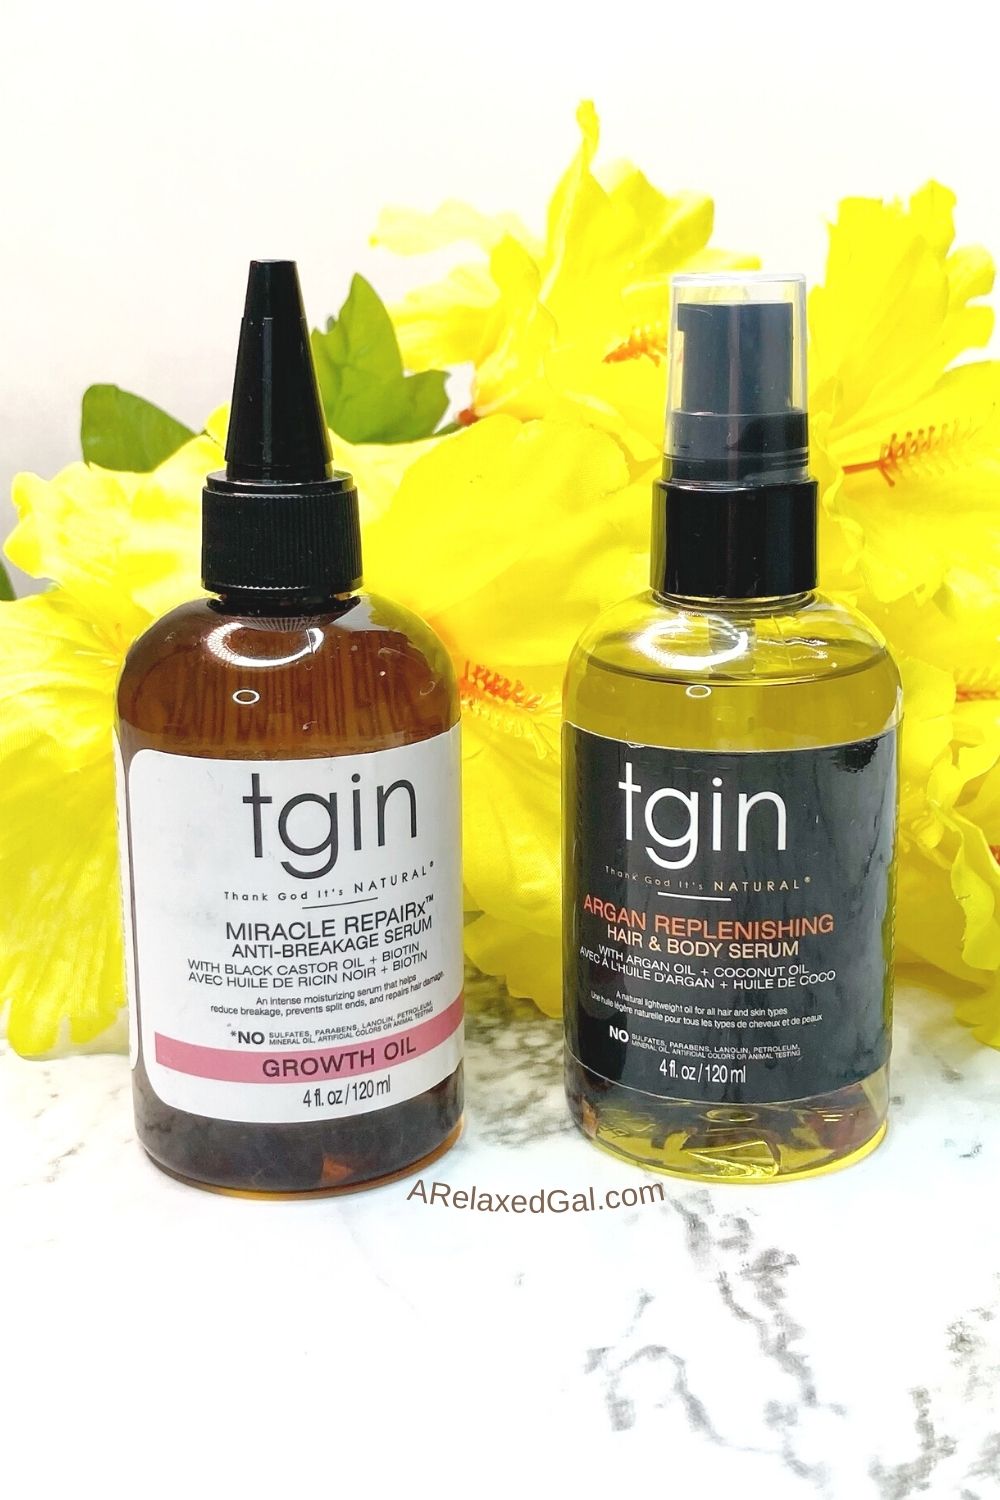 tgin anti-breakage and argan oil serums in front of yellow flowers.